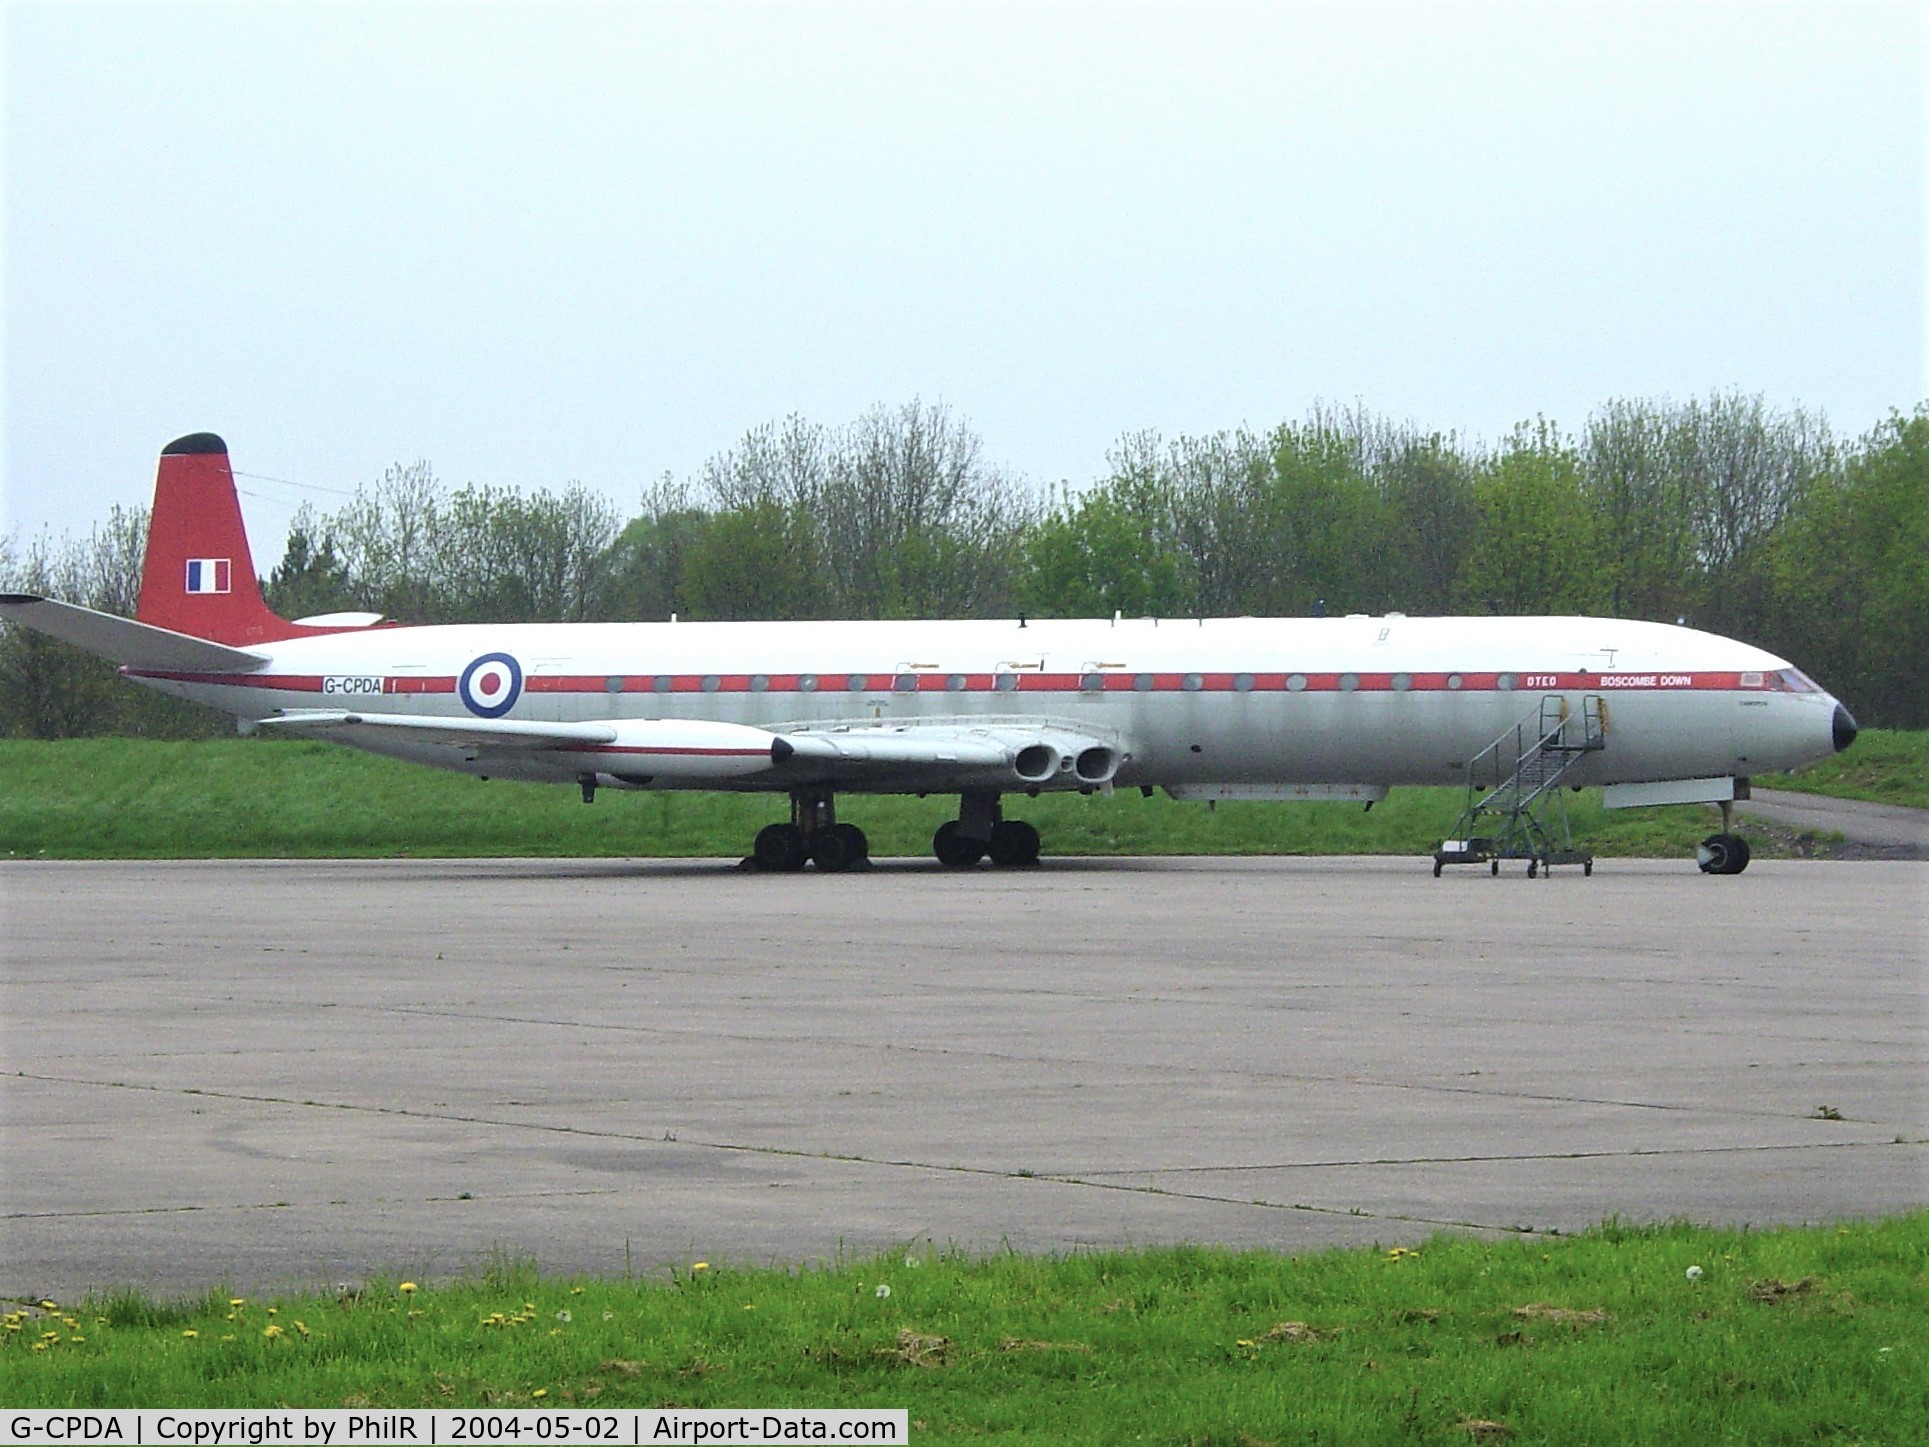 G-CPDA, 1963 De Havilland DH.106 Comet 4C C/N 6473, On display at the May 2004 Bruntingthorpe Open Day, alas no more.